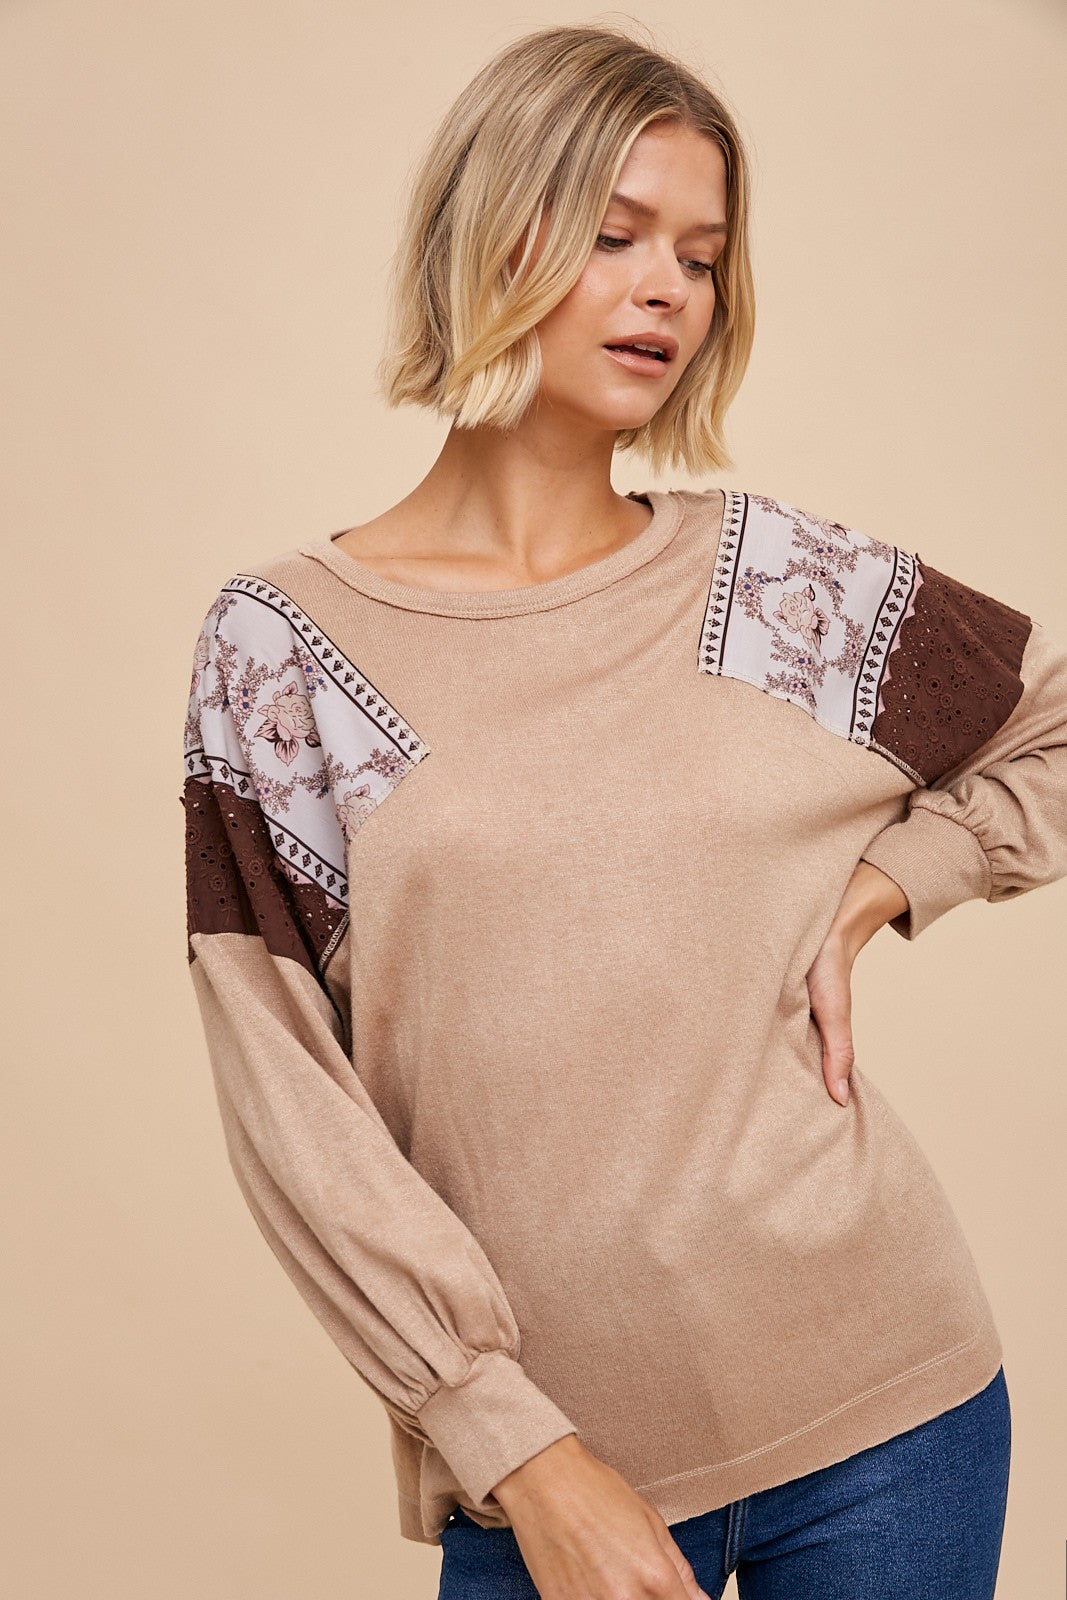 Boho Floral Contrast Knit Top (Ready to ship)